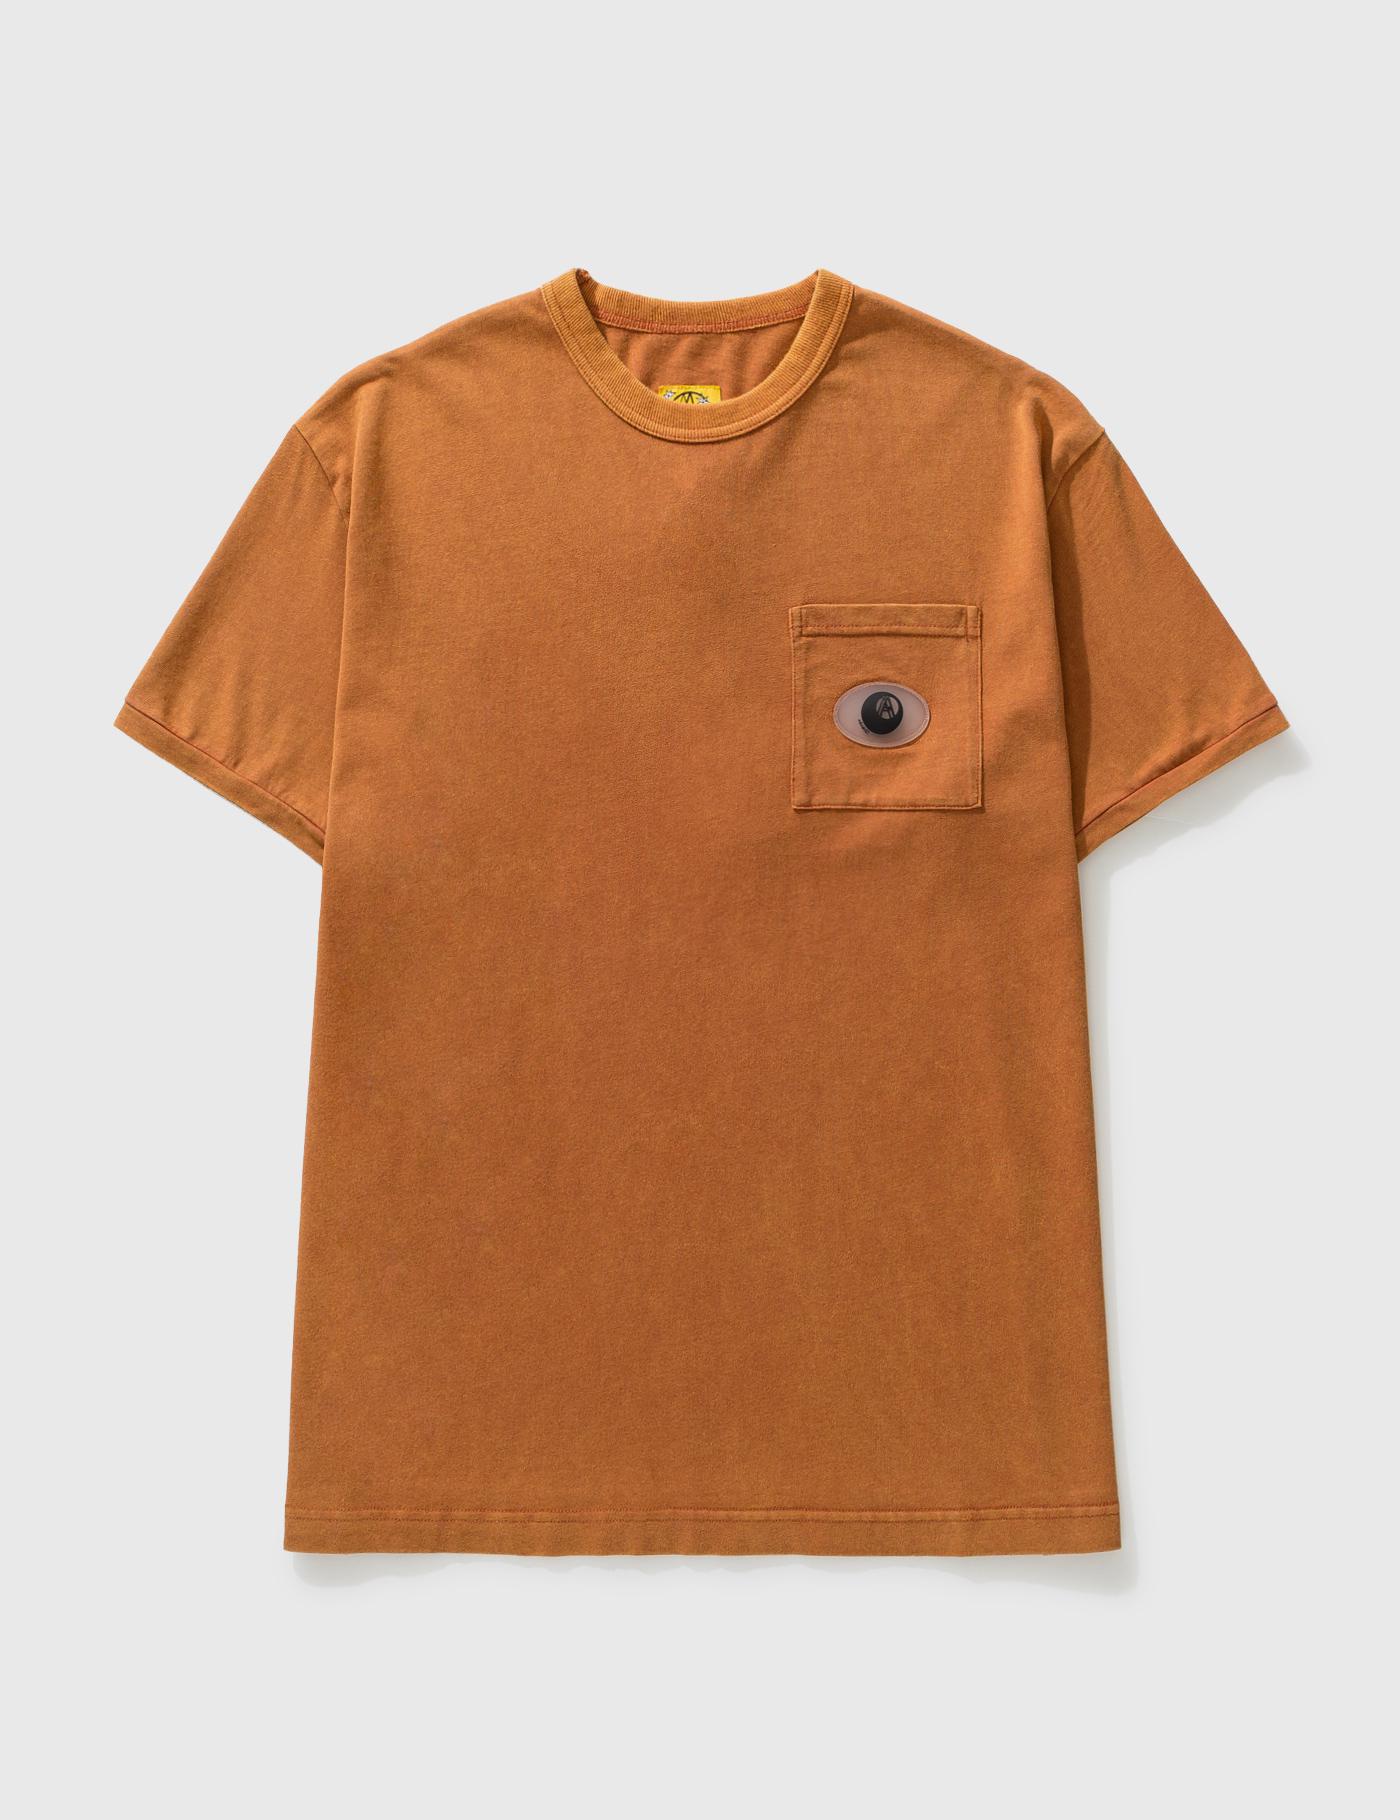 8 Ball Washed Pocket T-shirt by AGAINST LAB